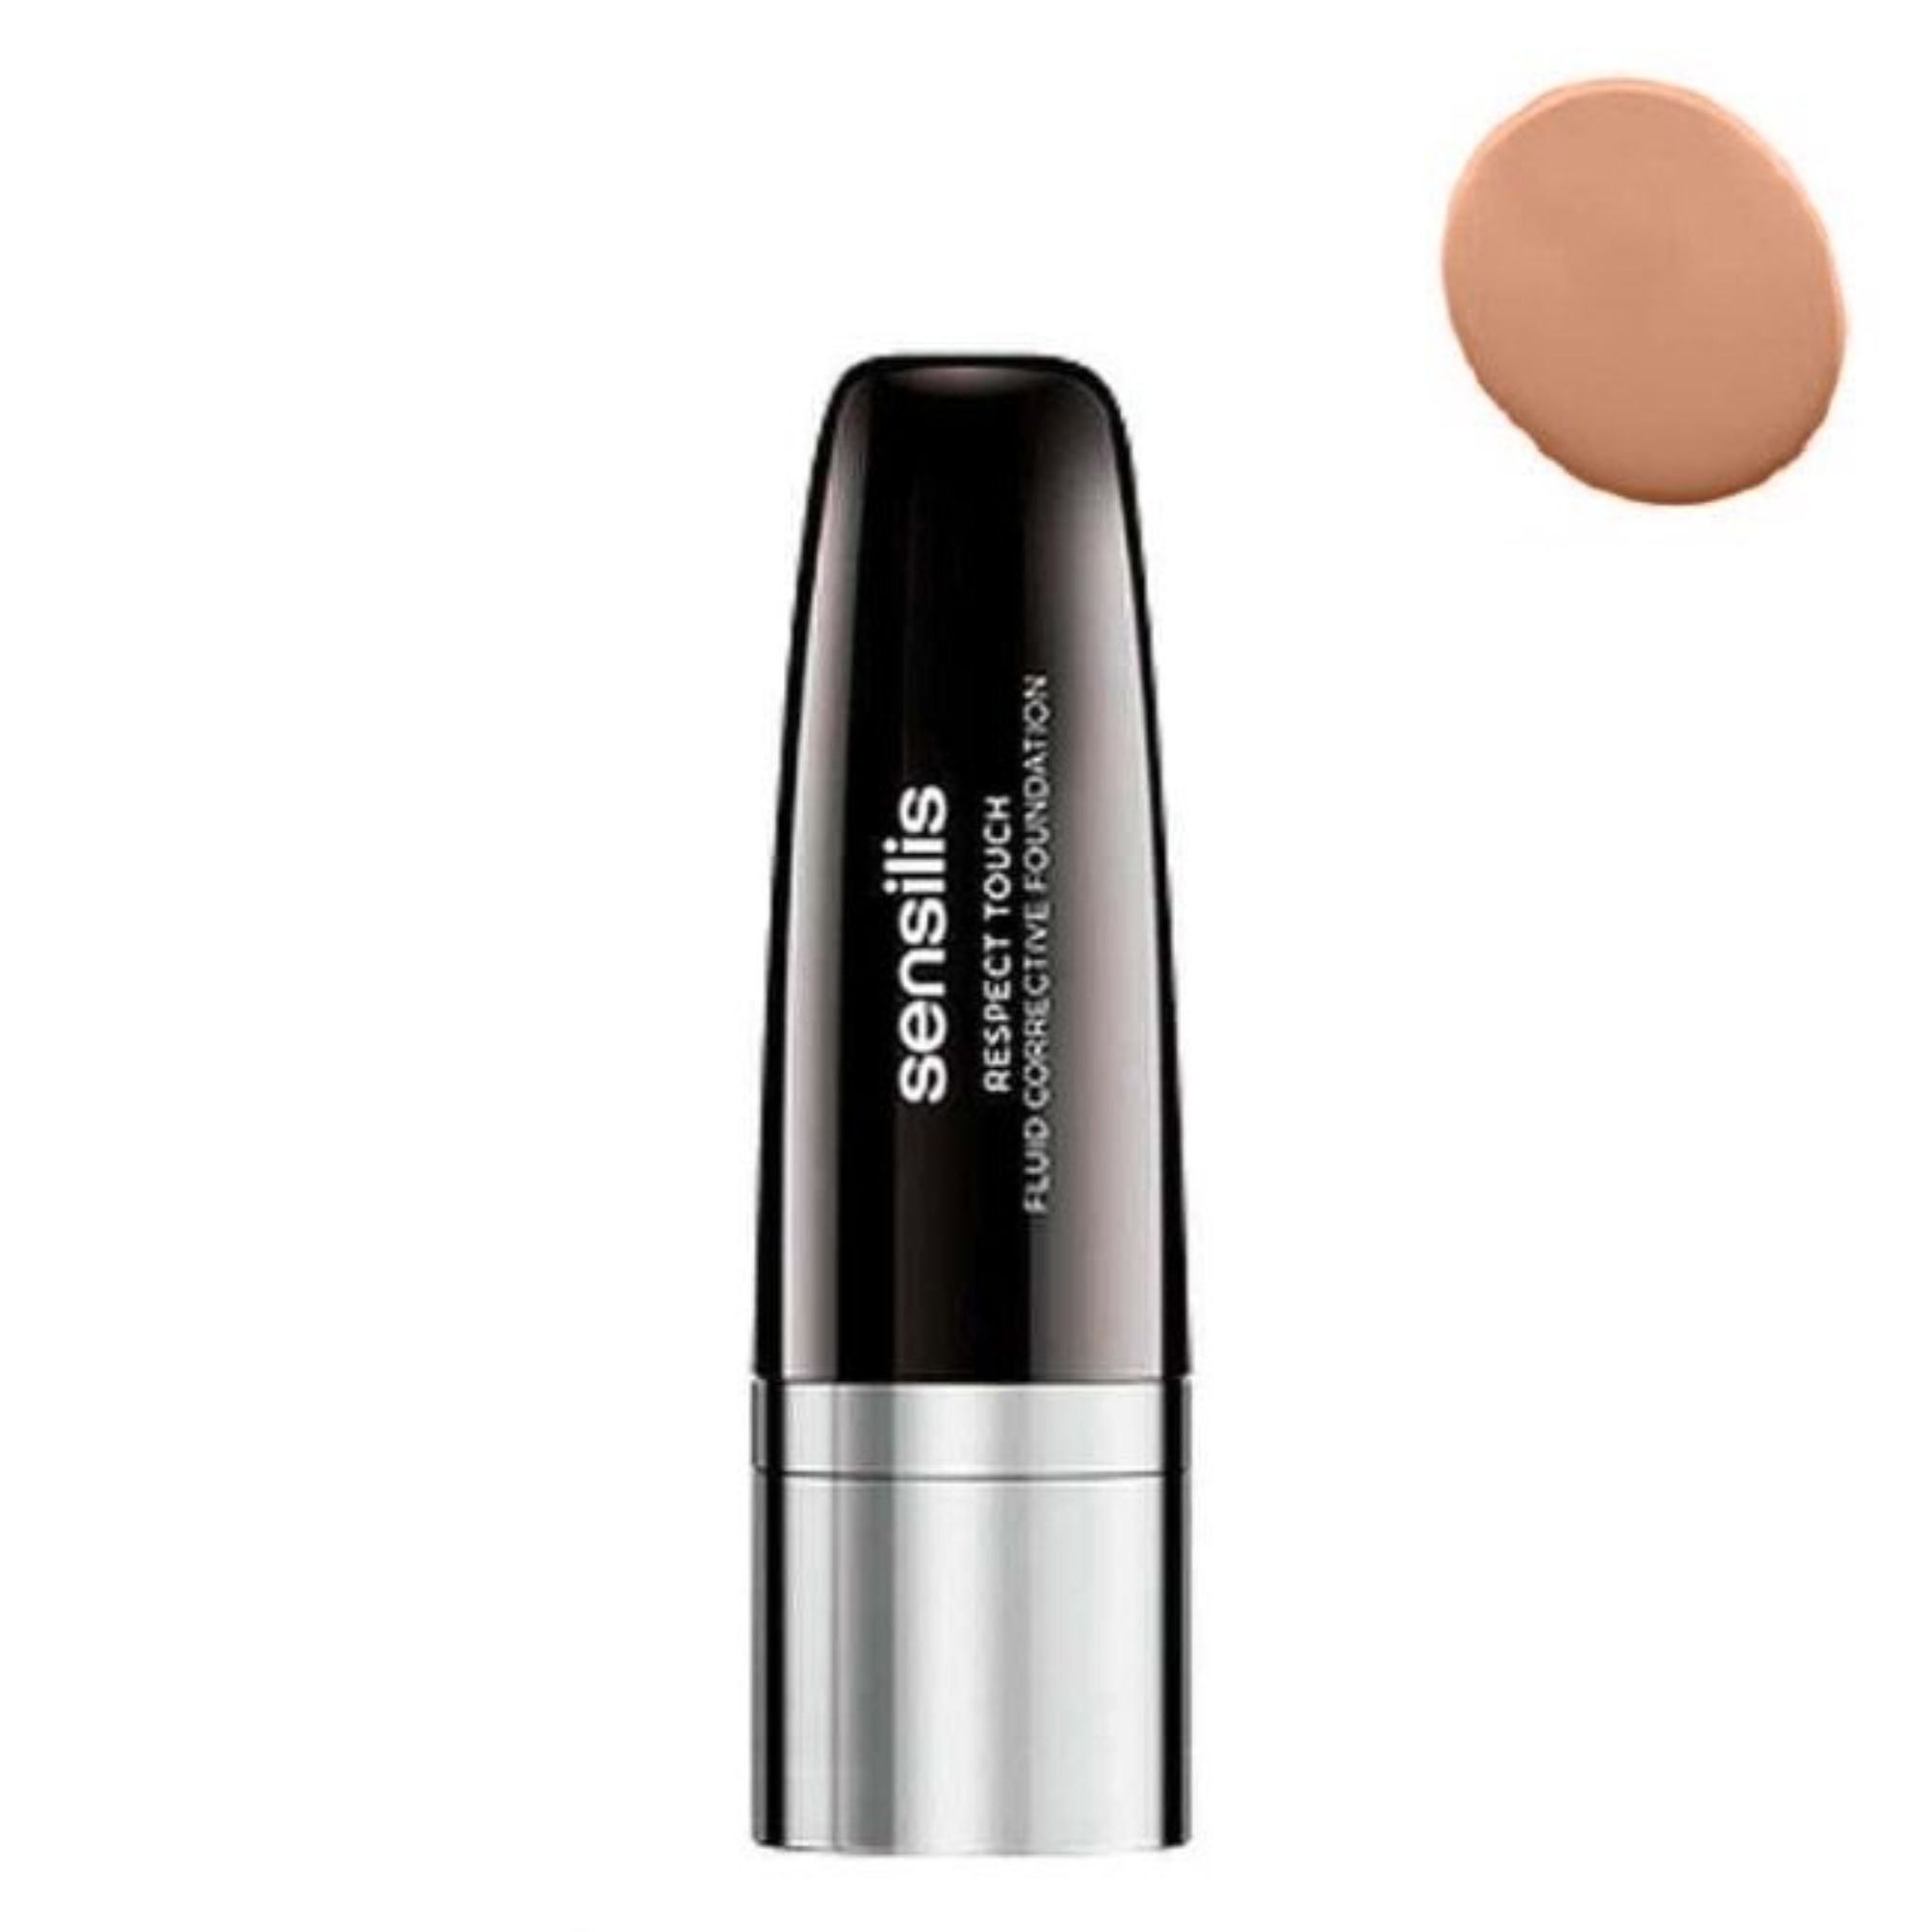 Sensilis Respect Touch Anti-Imperfections Foundation 05 Sand 30ml